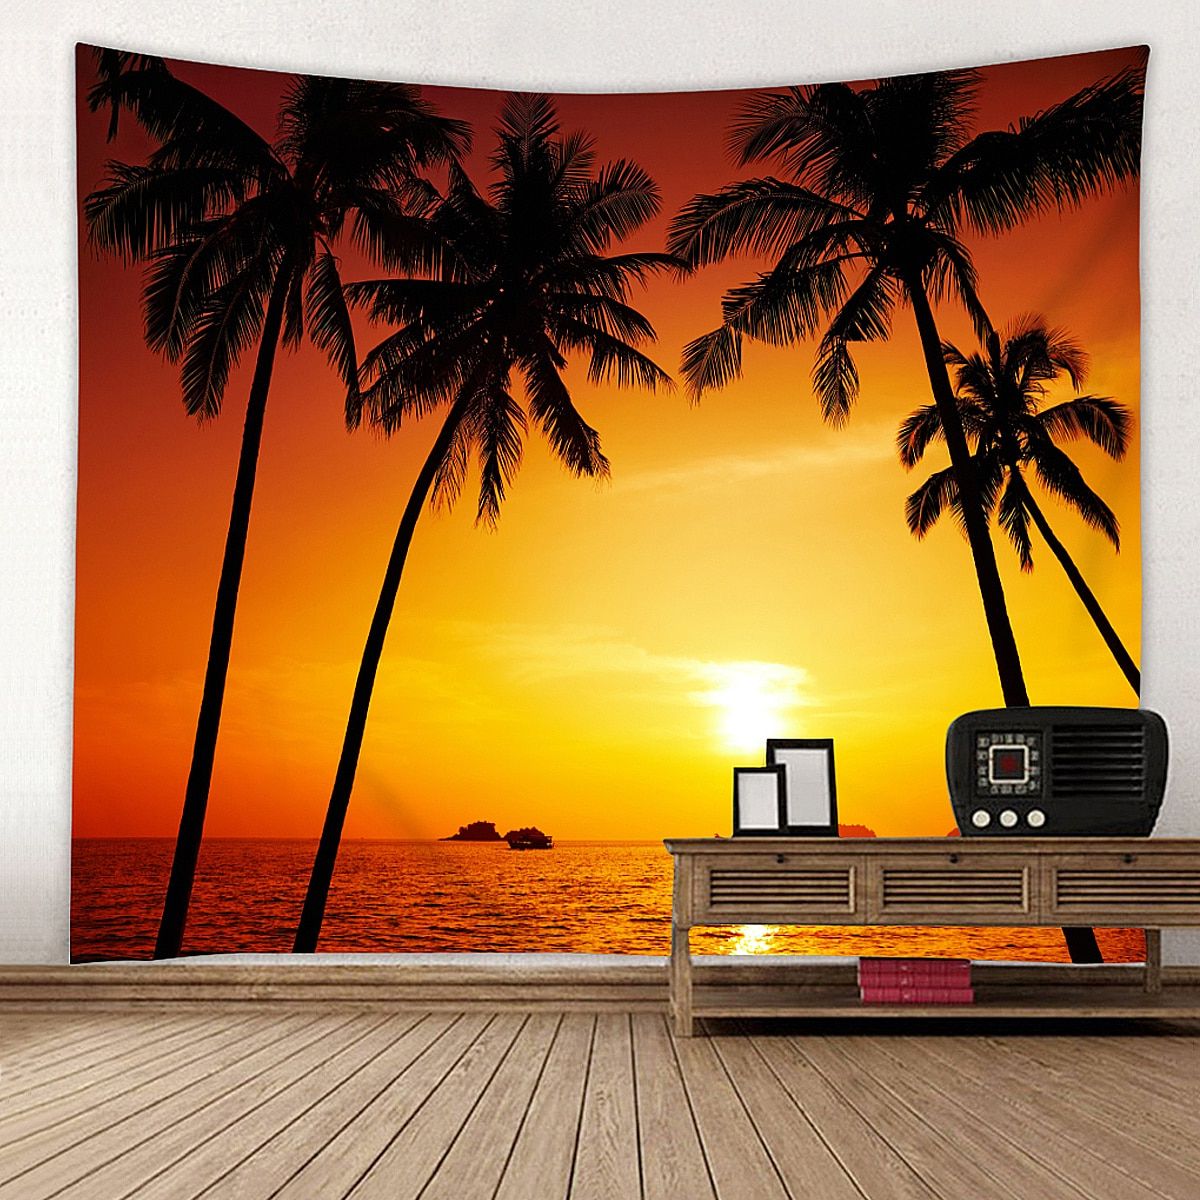 Summer Sunset Beach Sunrise Beach Wall Hanging Decor Art Within Most Recently Released Summer Wall Art (View 10 of 20)